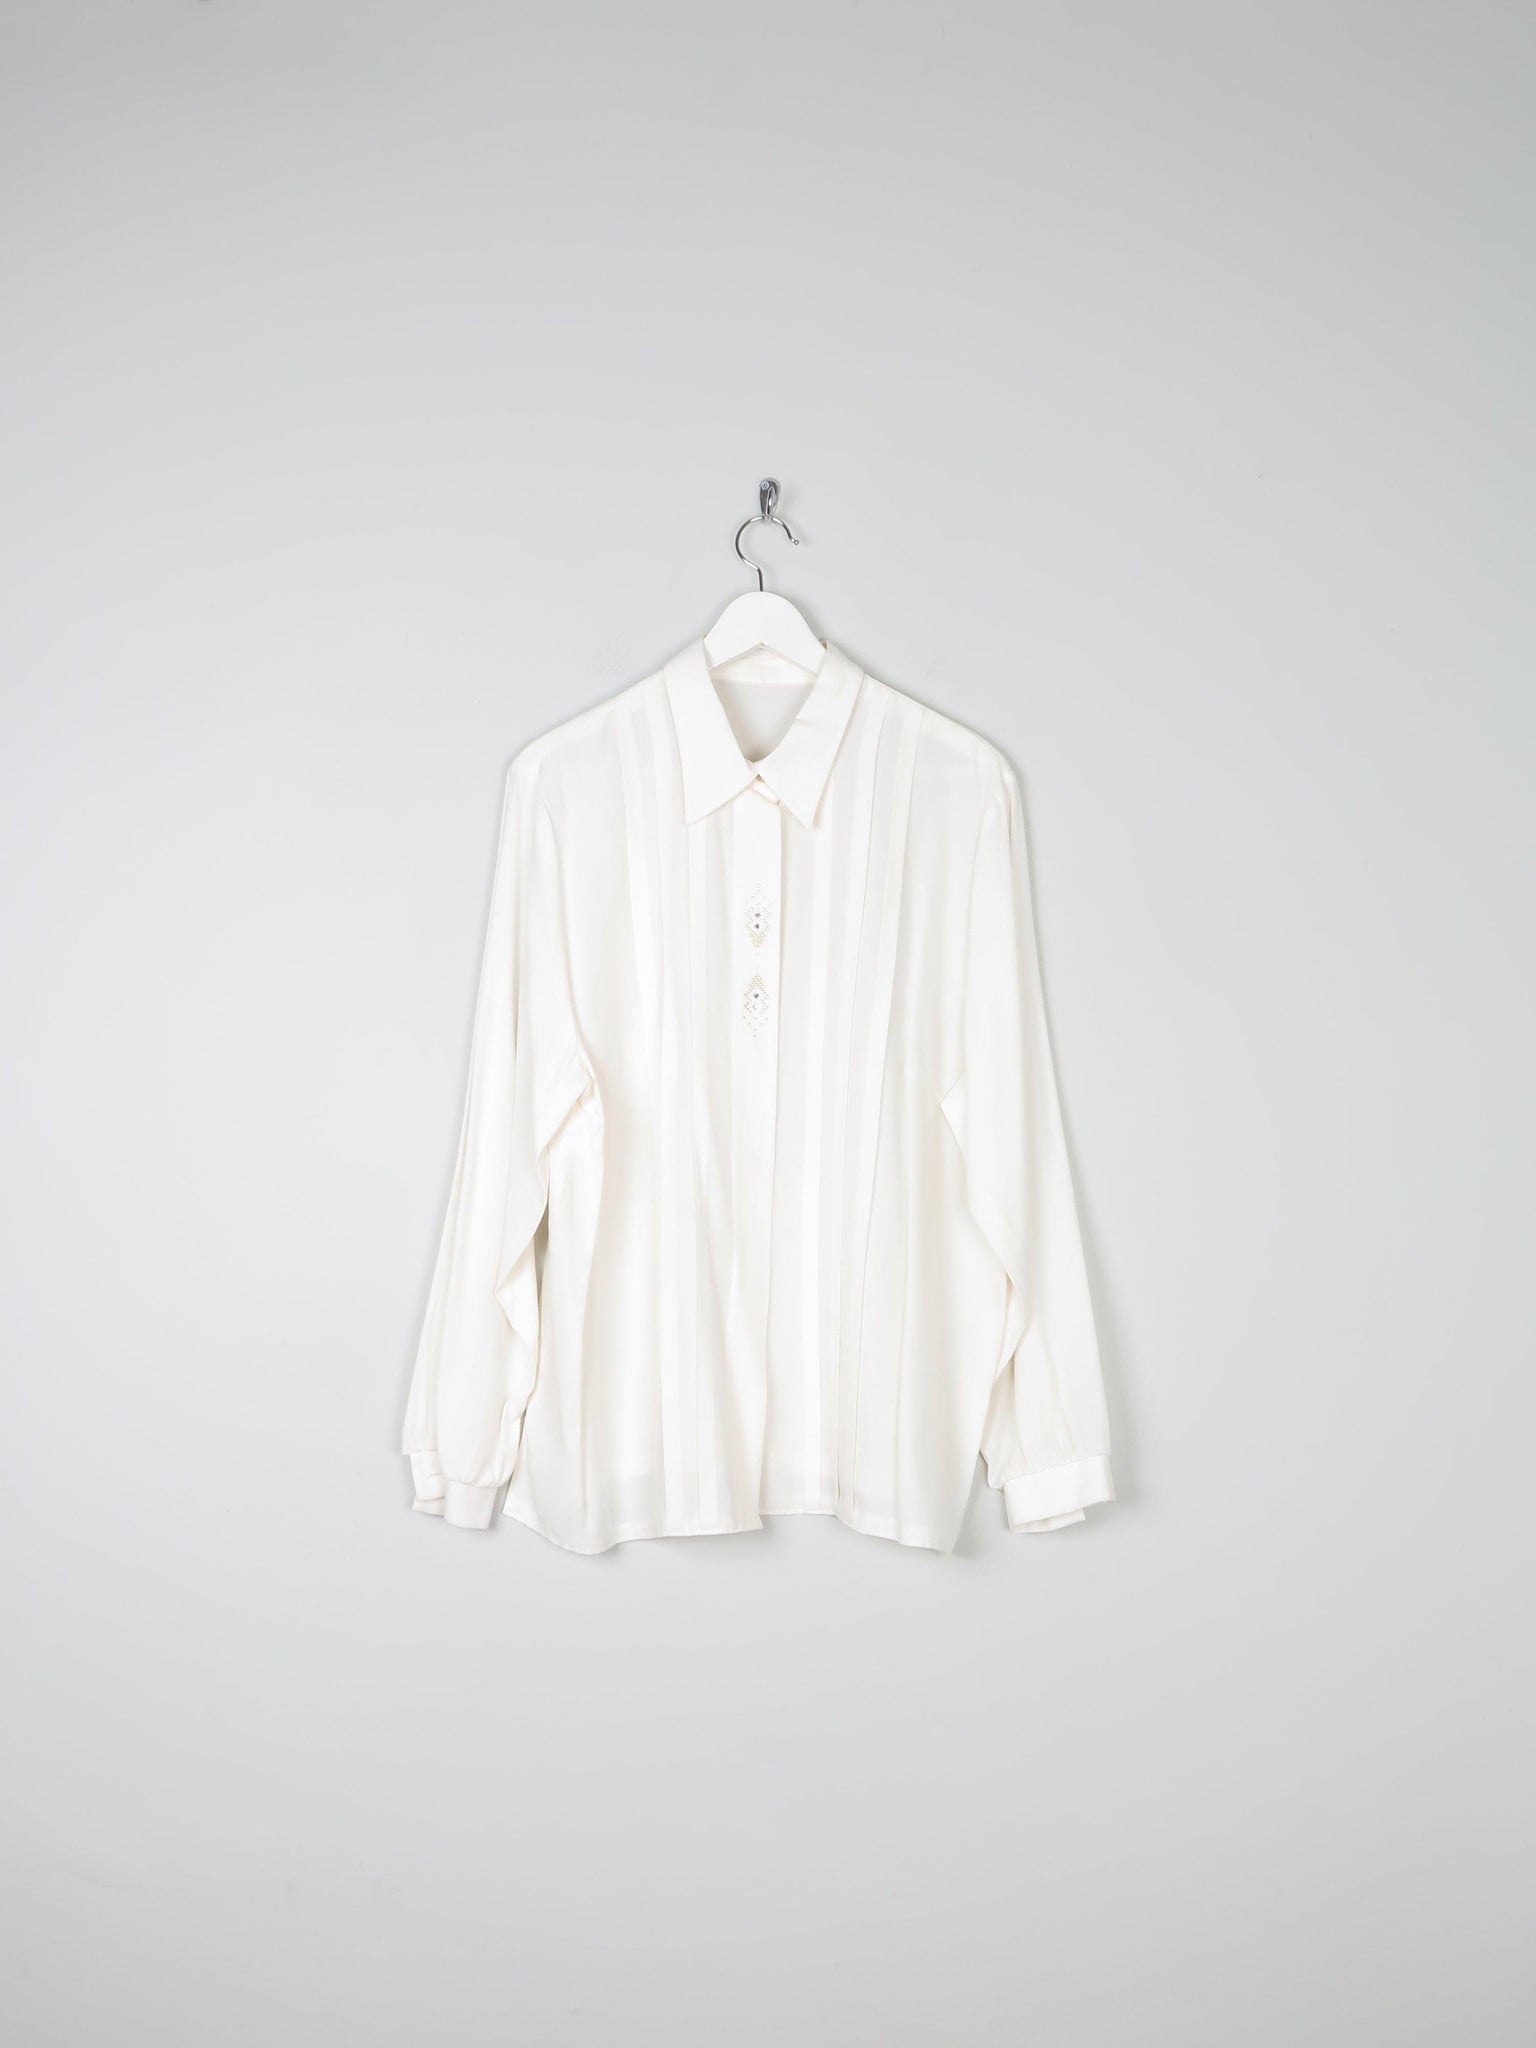 Ivory Vintage Shirt/Blouse With Collar & Rhinestone Detail L/XL - The Harlequin